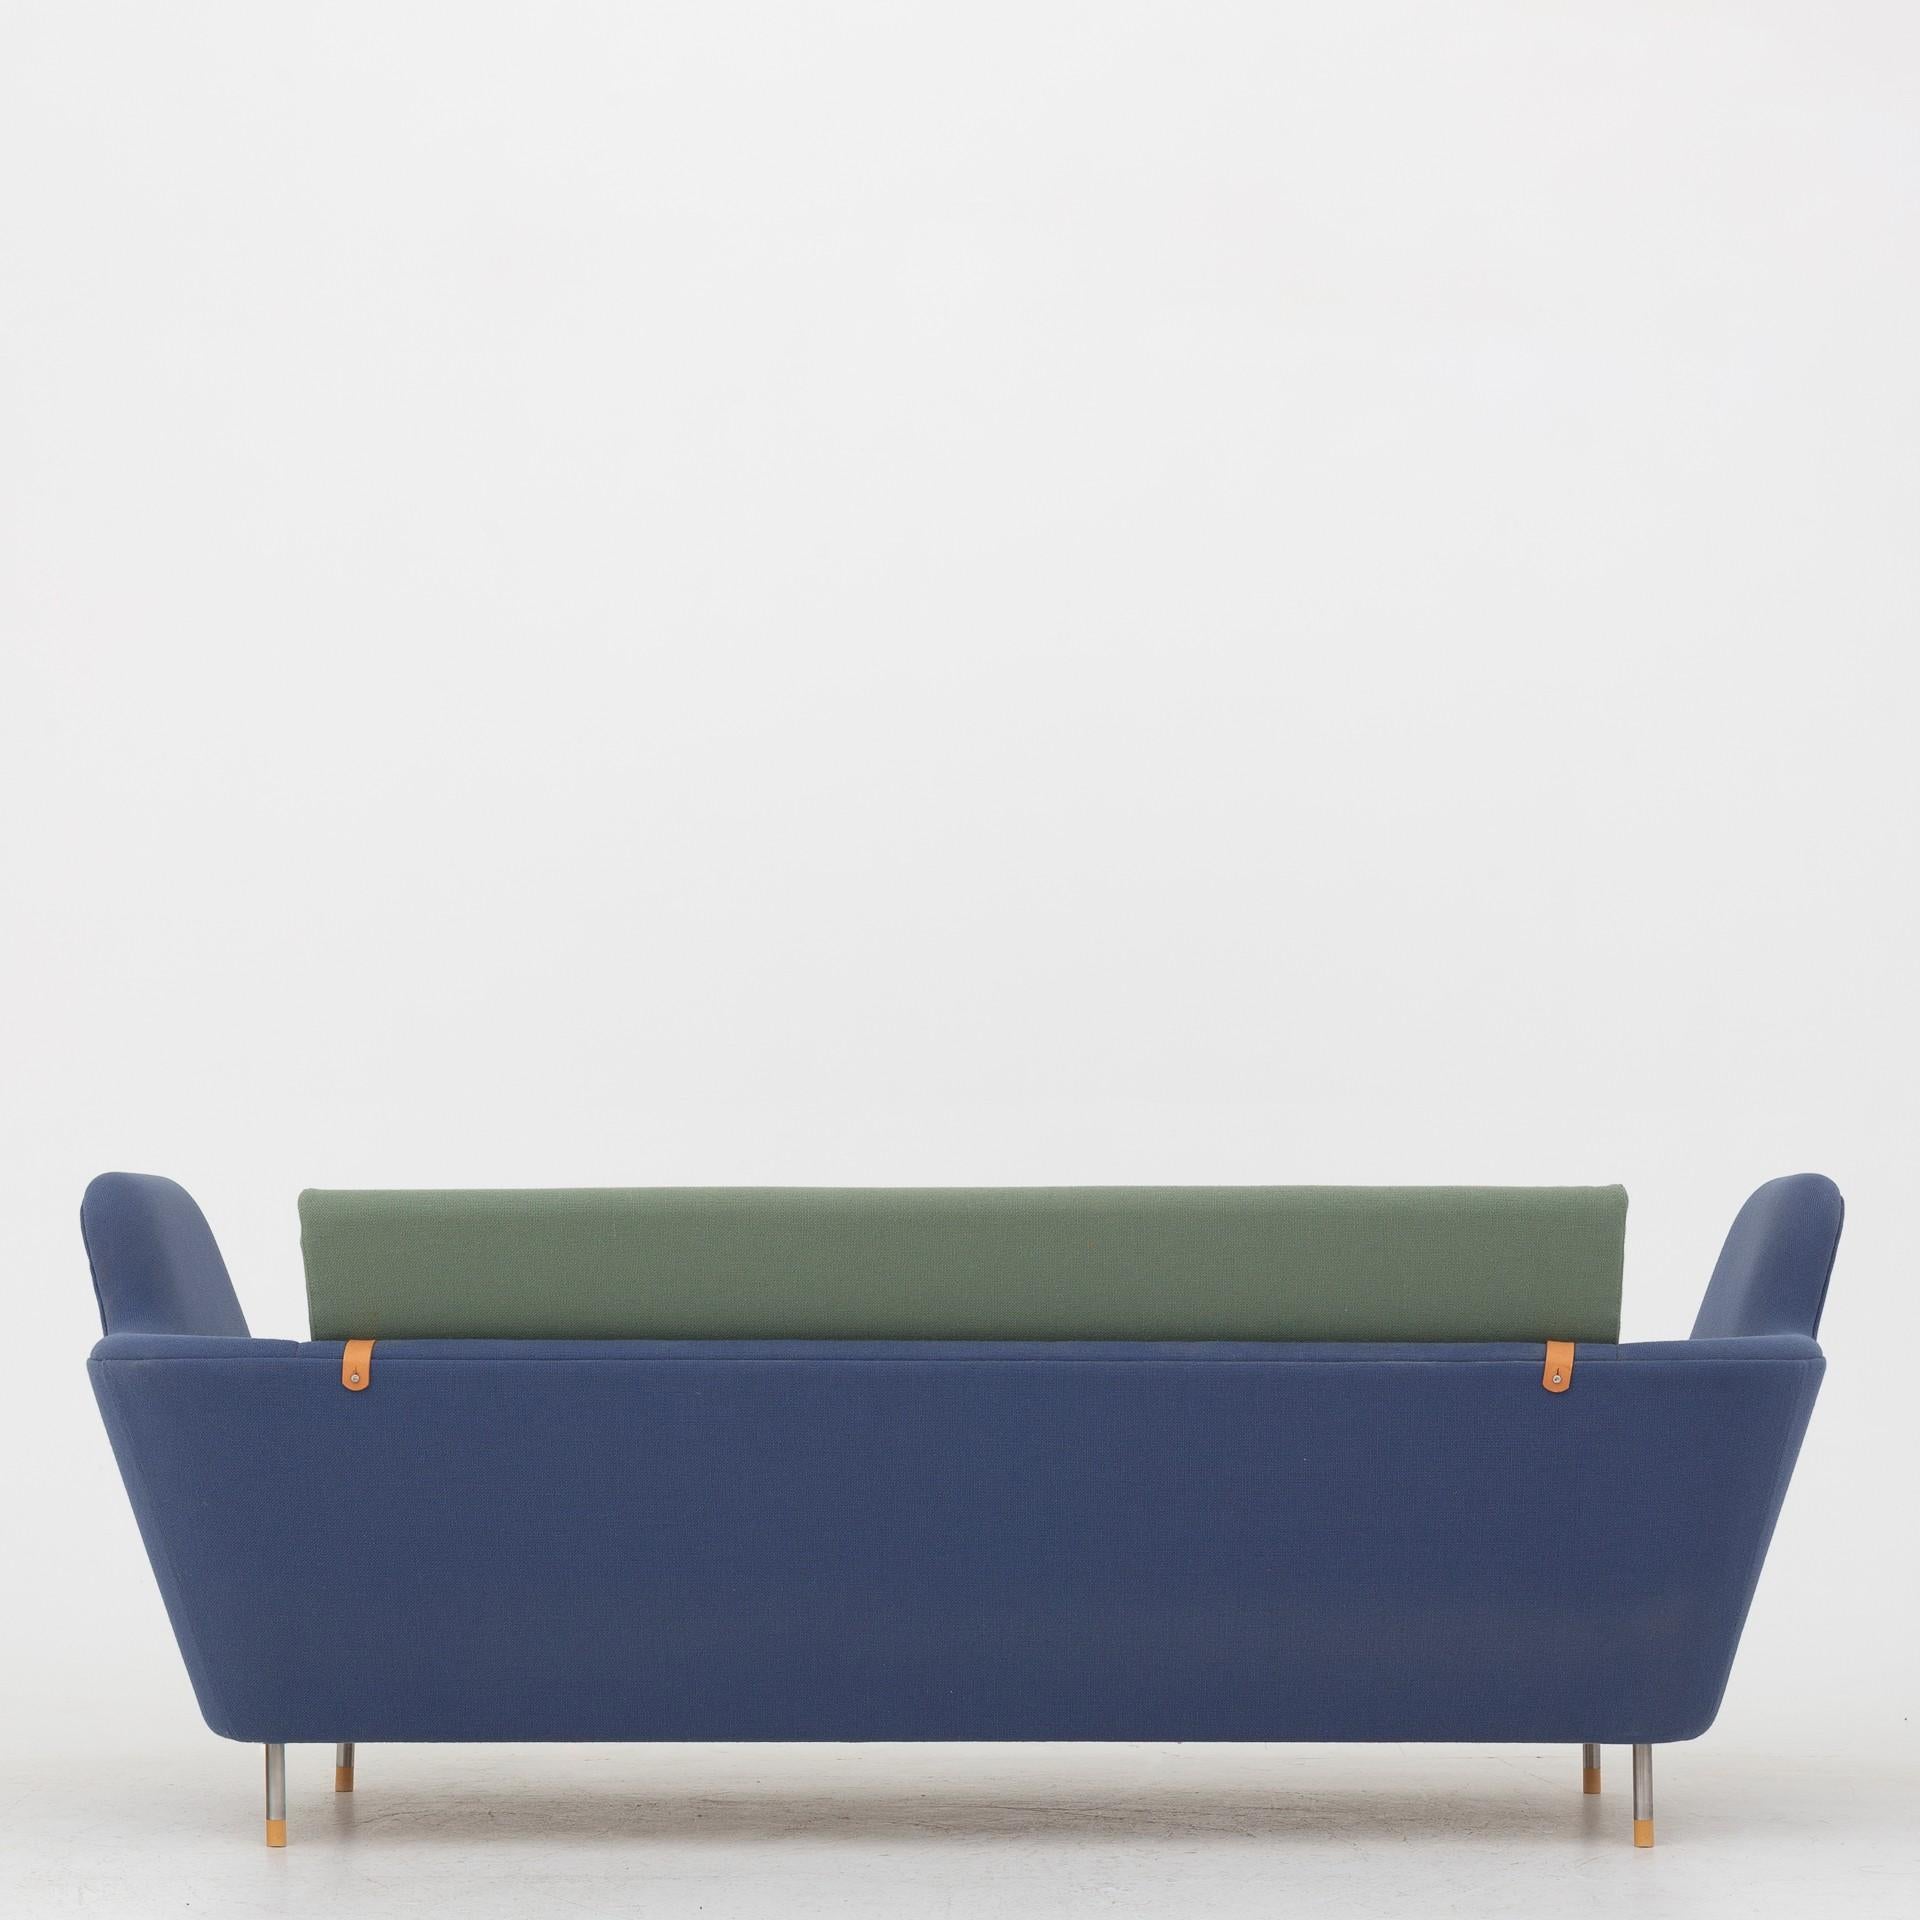 FJ 57 - 'Tivoli' sofa in blue and green wool with legs in steel and shoes of maple. Maker One collection.